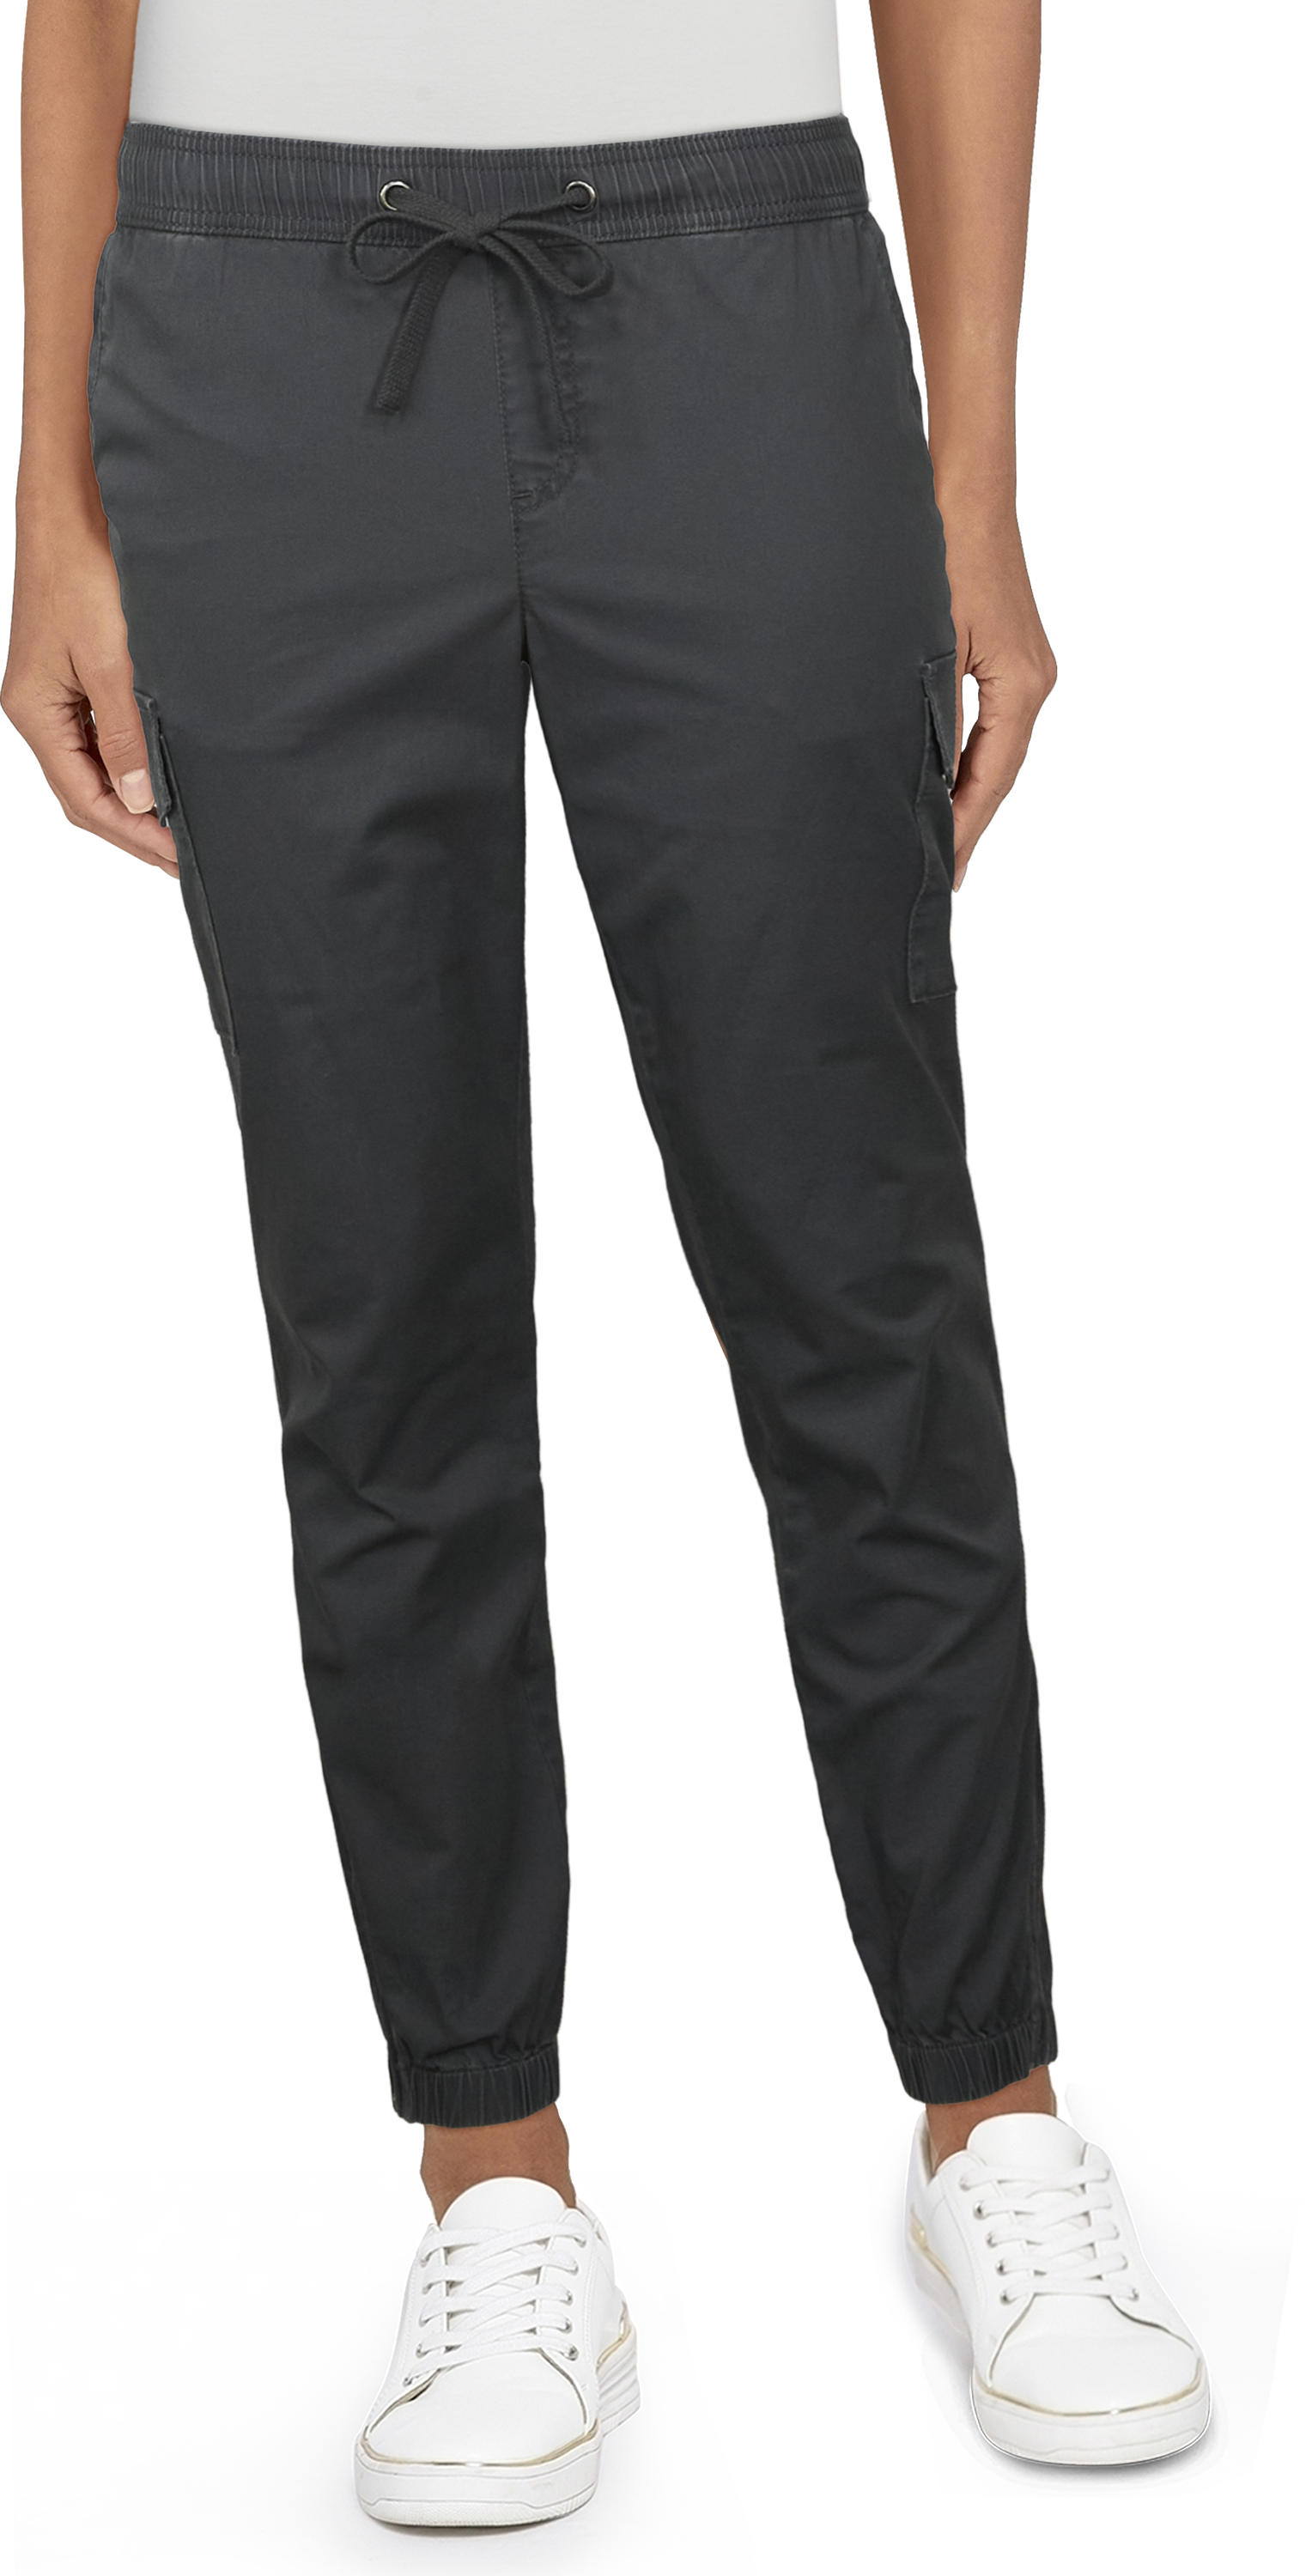 Natural Reflections Bella Vista Joggers for Ladies - New Graphite Gray - S